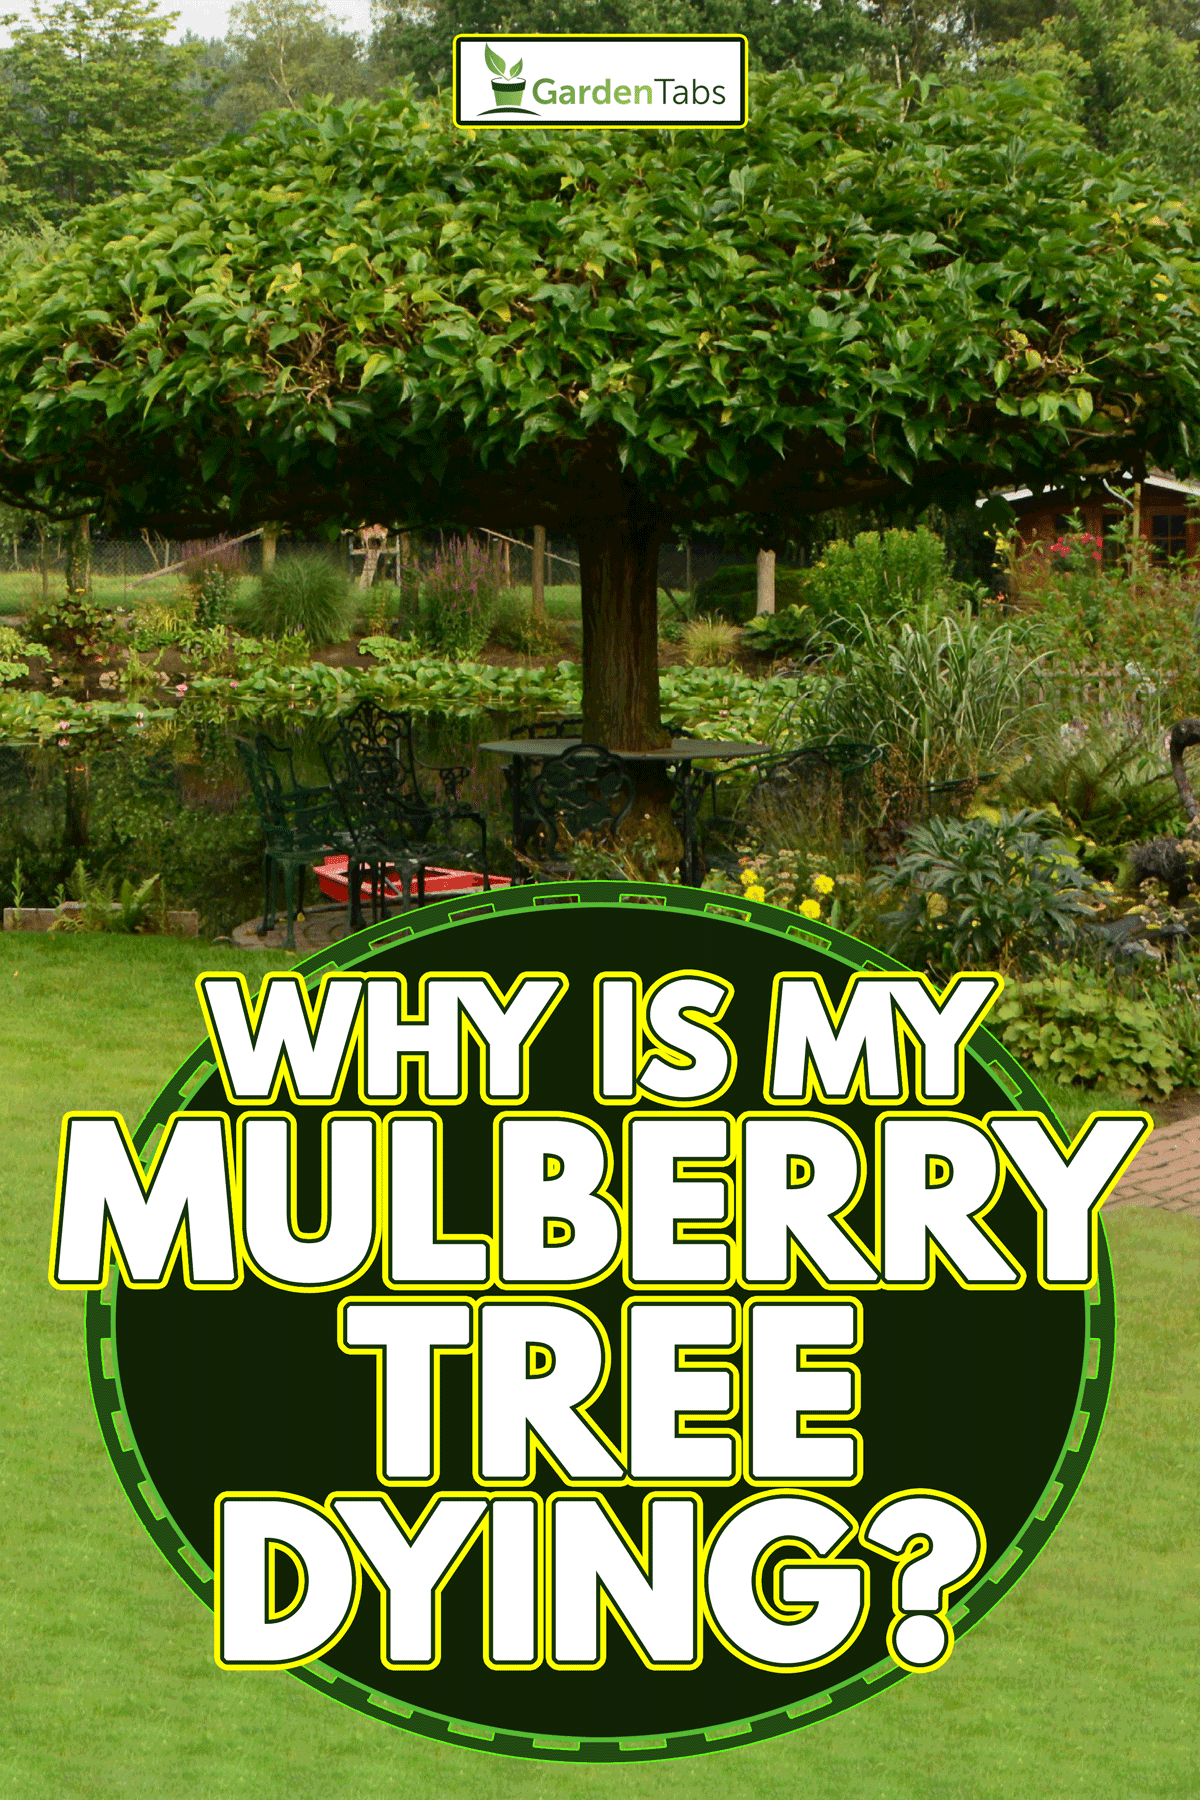 Mulberry tree in the garden, Why Is My Mulberry Tree Dying?